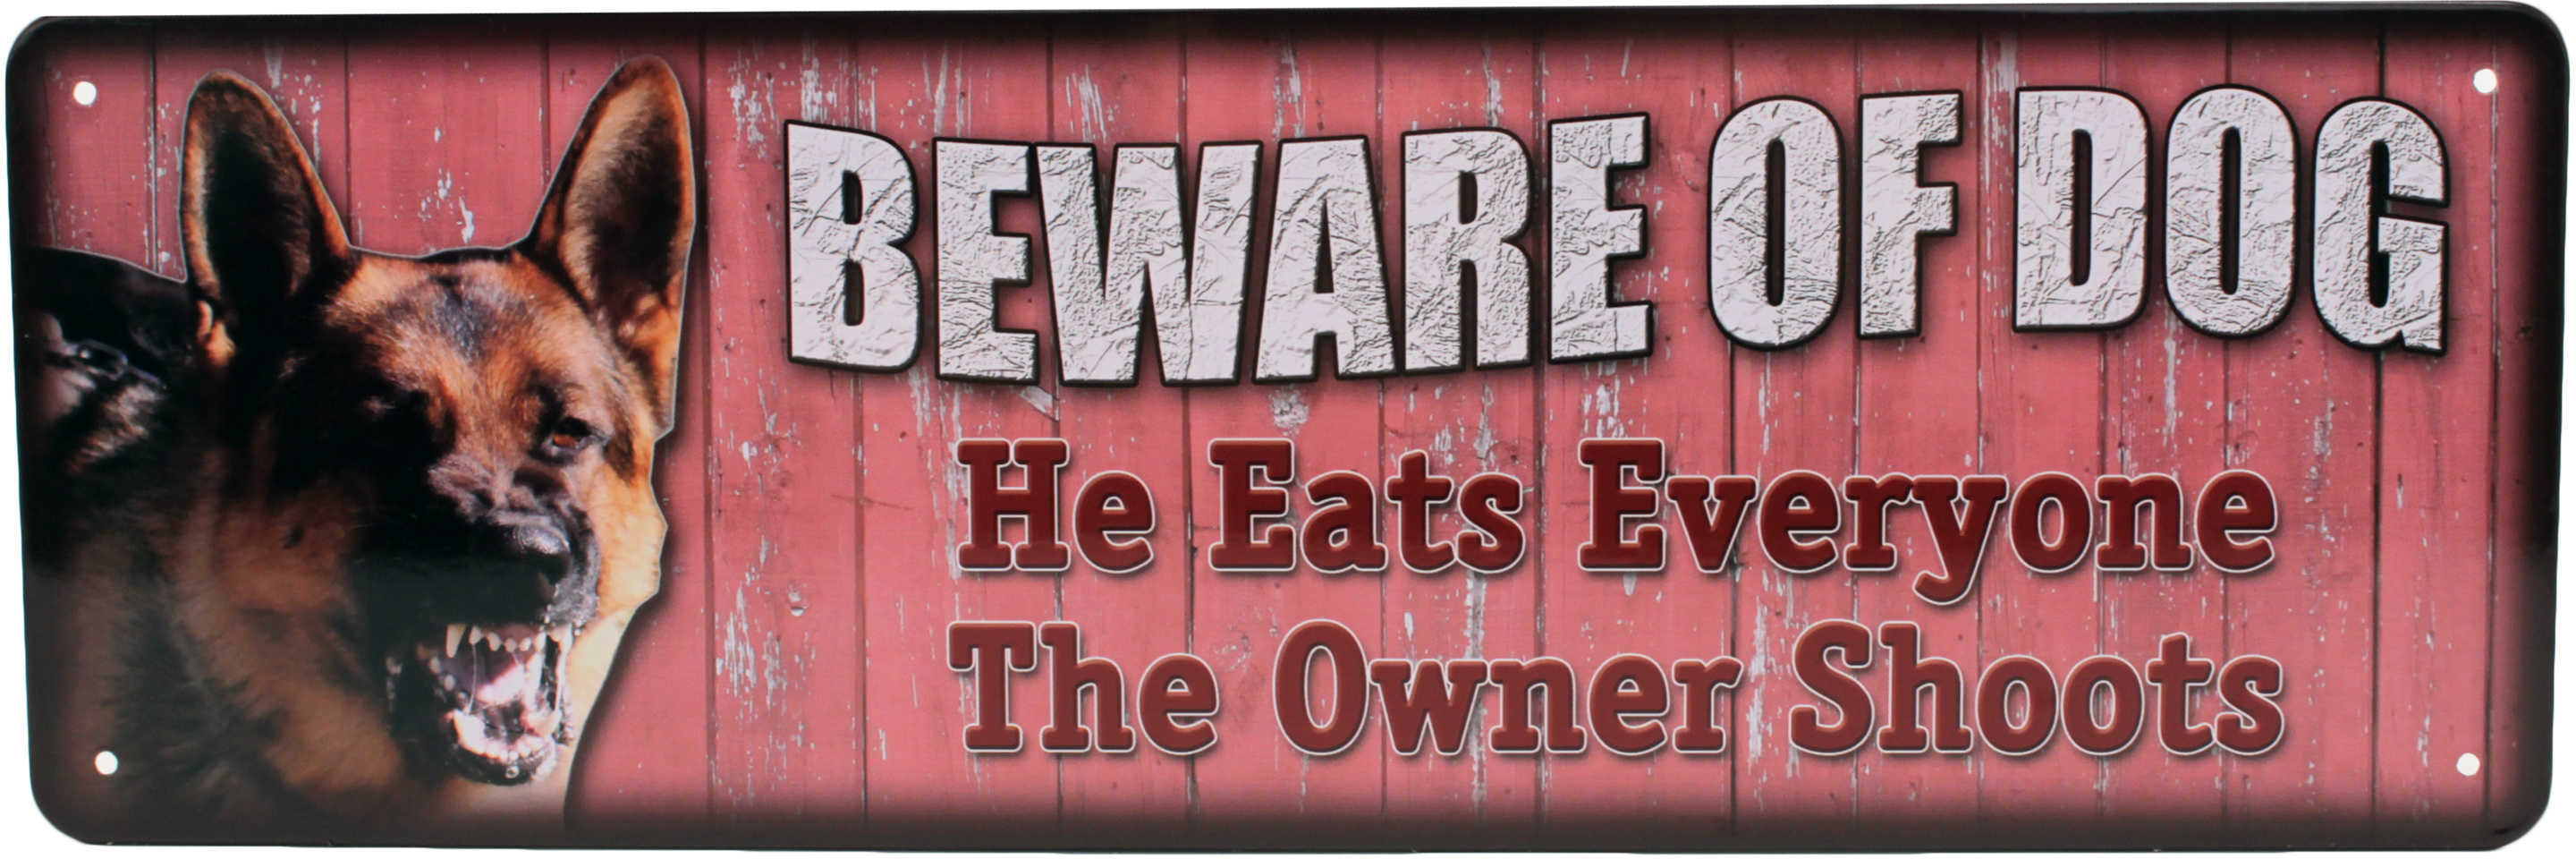 Rivers Edge Products 10.5" x 3.5" Tin Sign Beware of Dog 1417